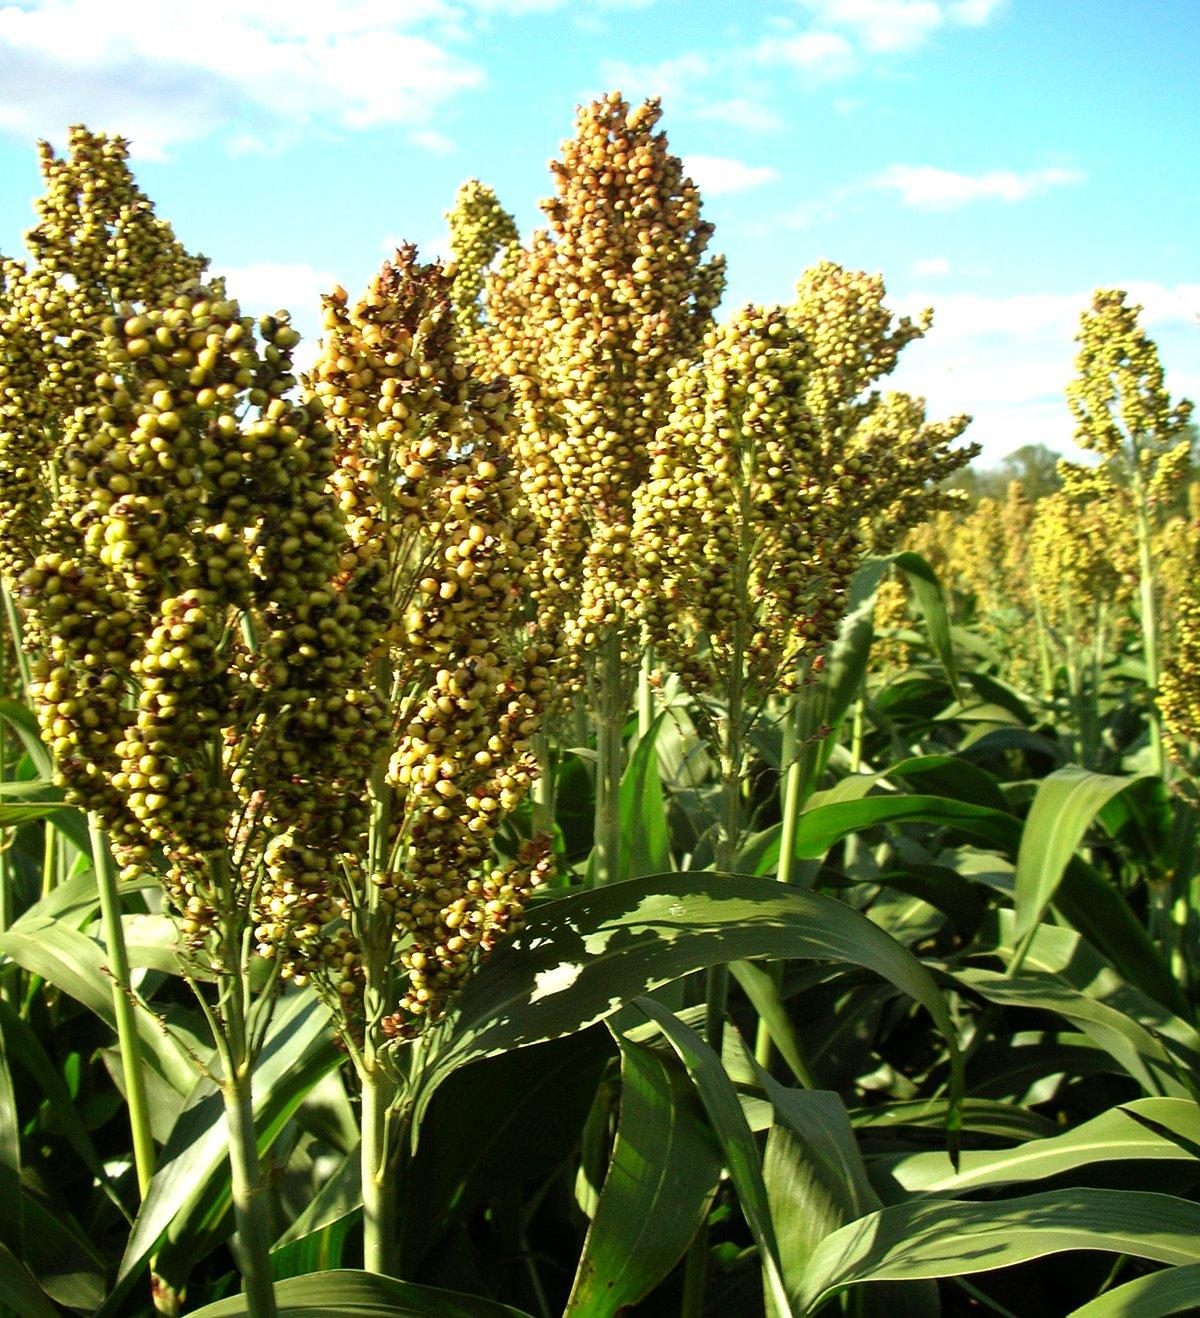 Ag crops like grain sorghum that stand above snow cover can be helpful to wild turkeys.